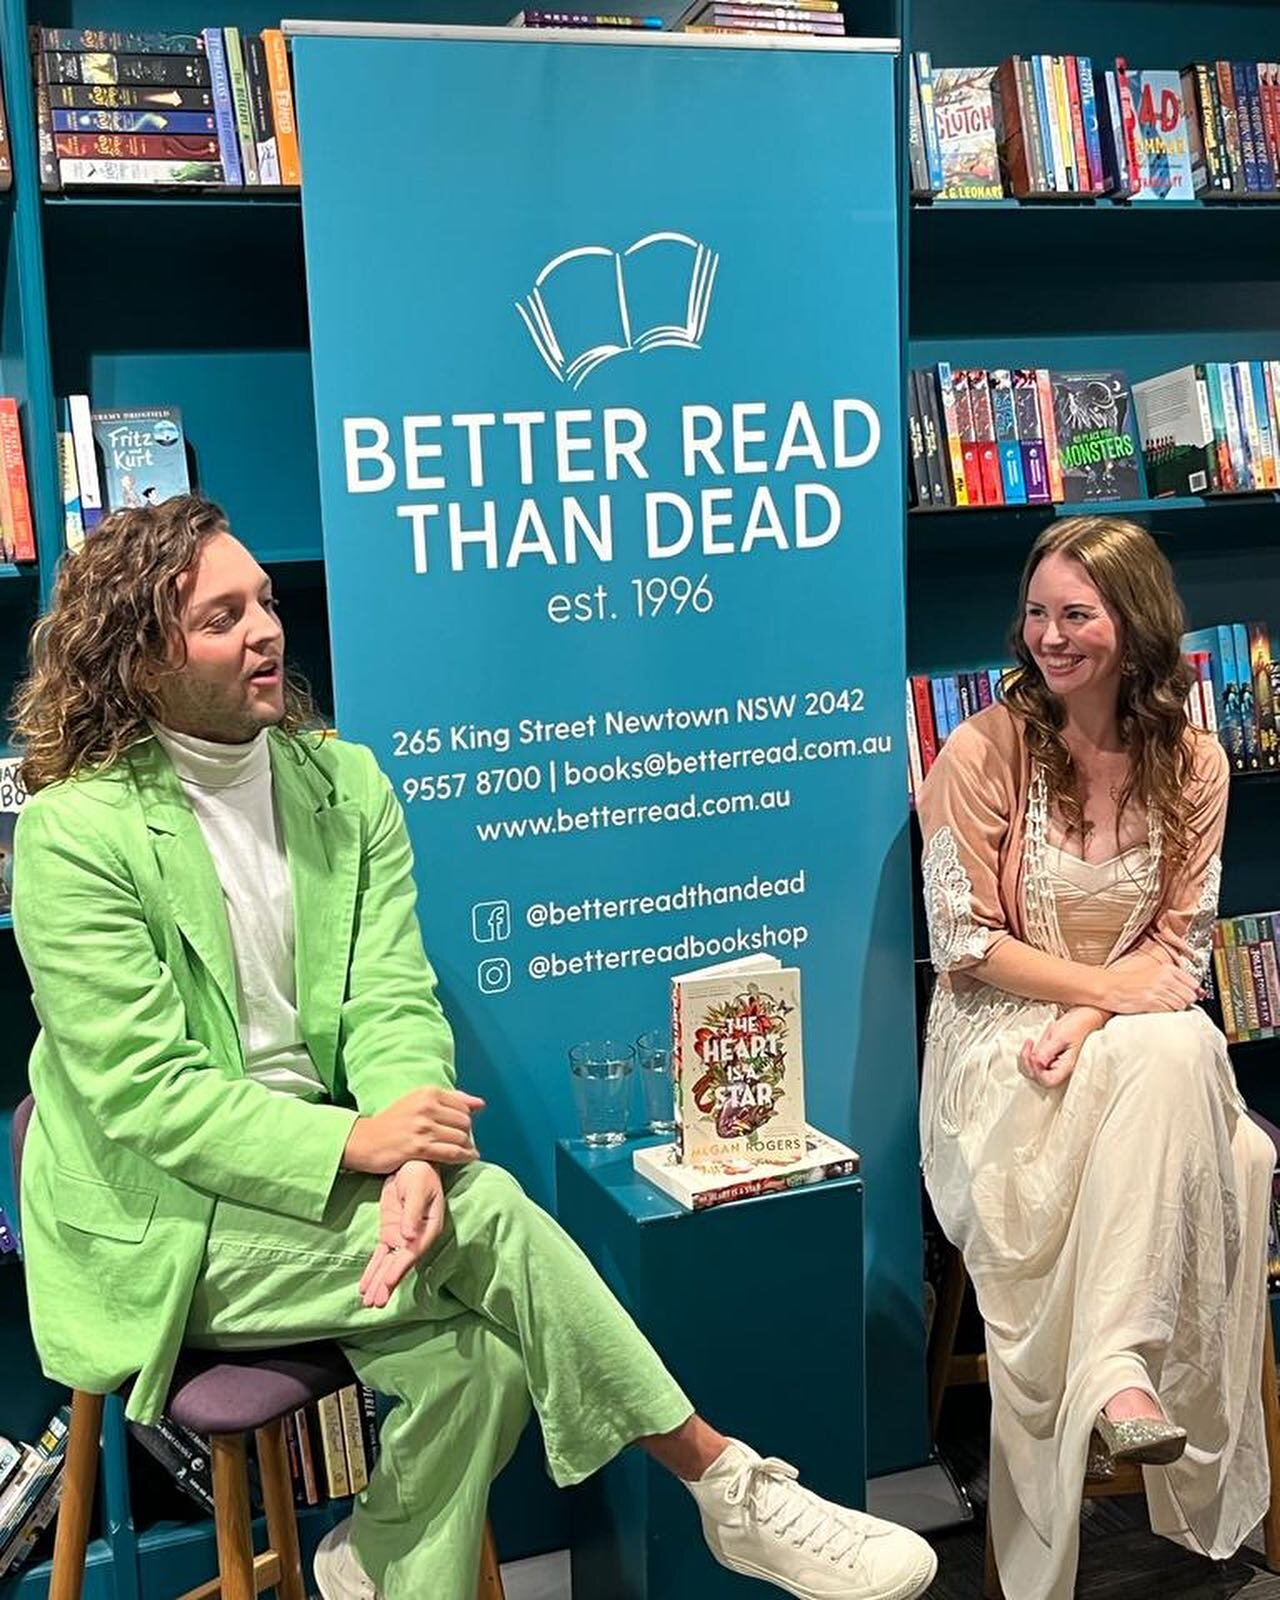 Sydney, Sydney, Sydney&hellip; 

Where do we start?

What a dream come true it was to have this launch at @betterreadbookshop &hellip; let alone fill the room (thanks so much everyone for squishing in over tea and scones and champagne 🥂). You brough